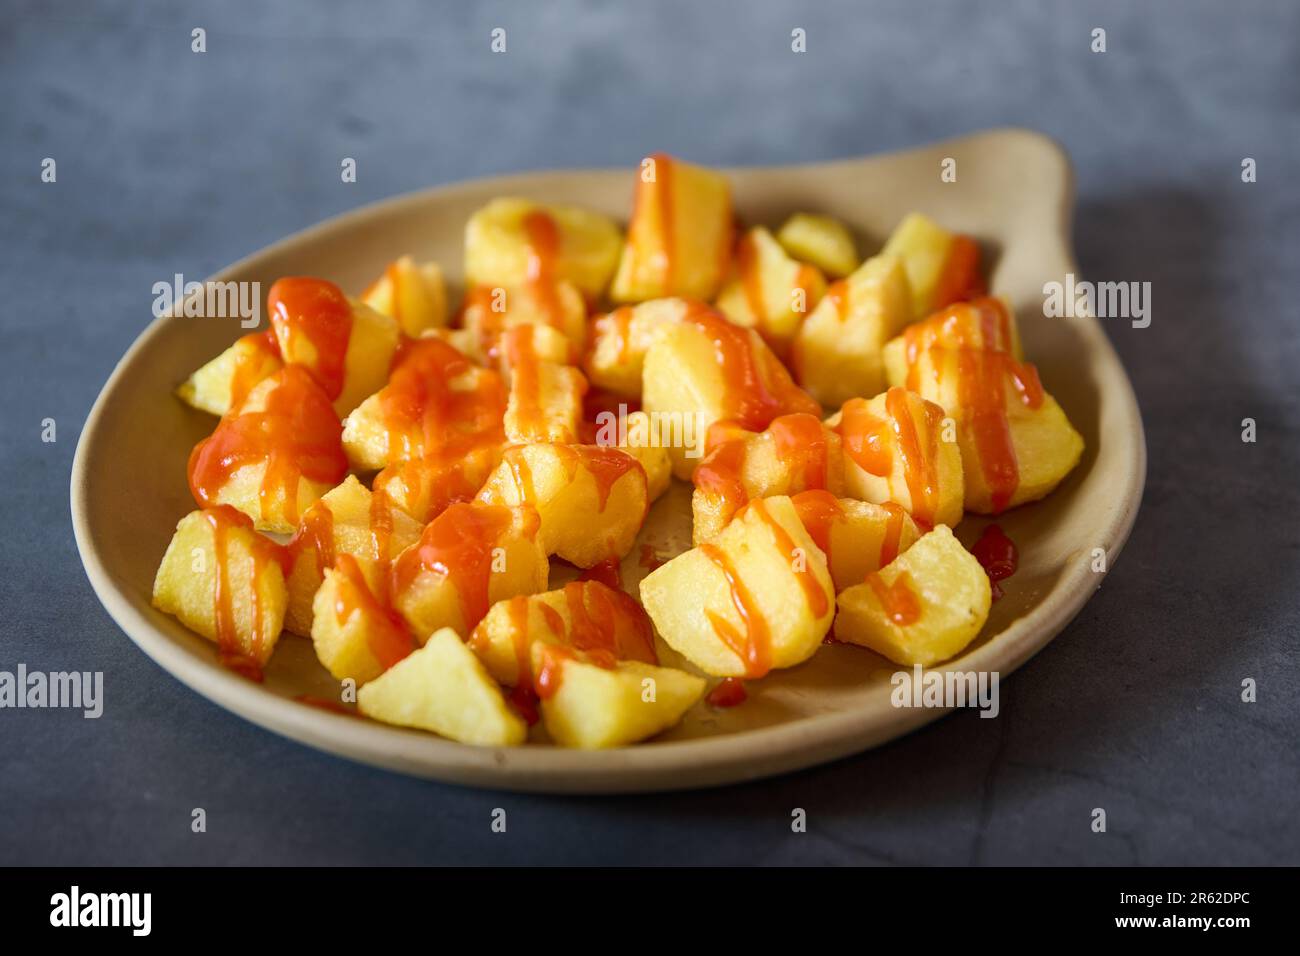 An appetizing image of a bowl containing diced apple pieces and cheese covered in a light layer of sauce Stock Photo